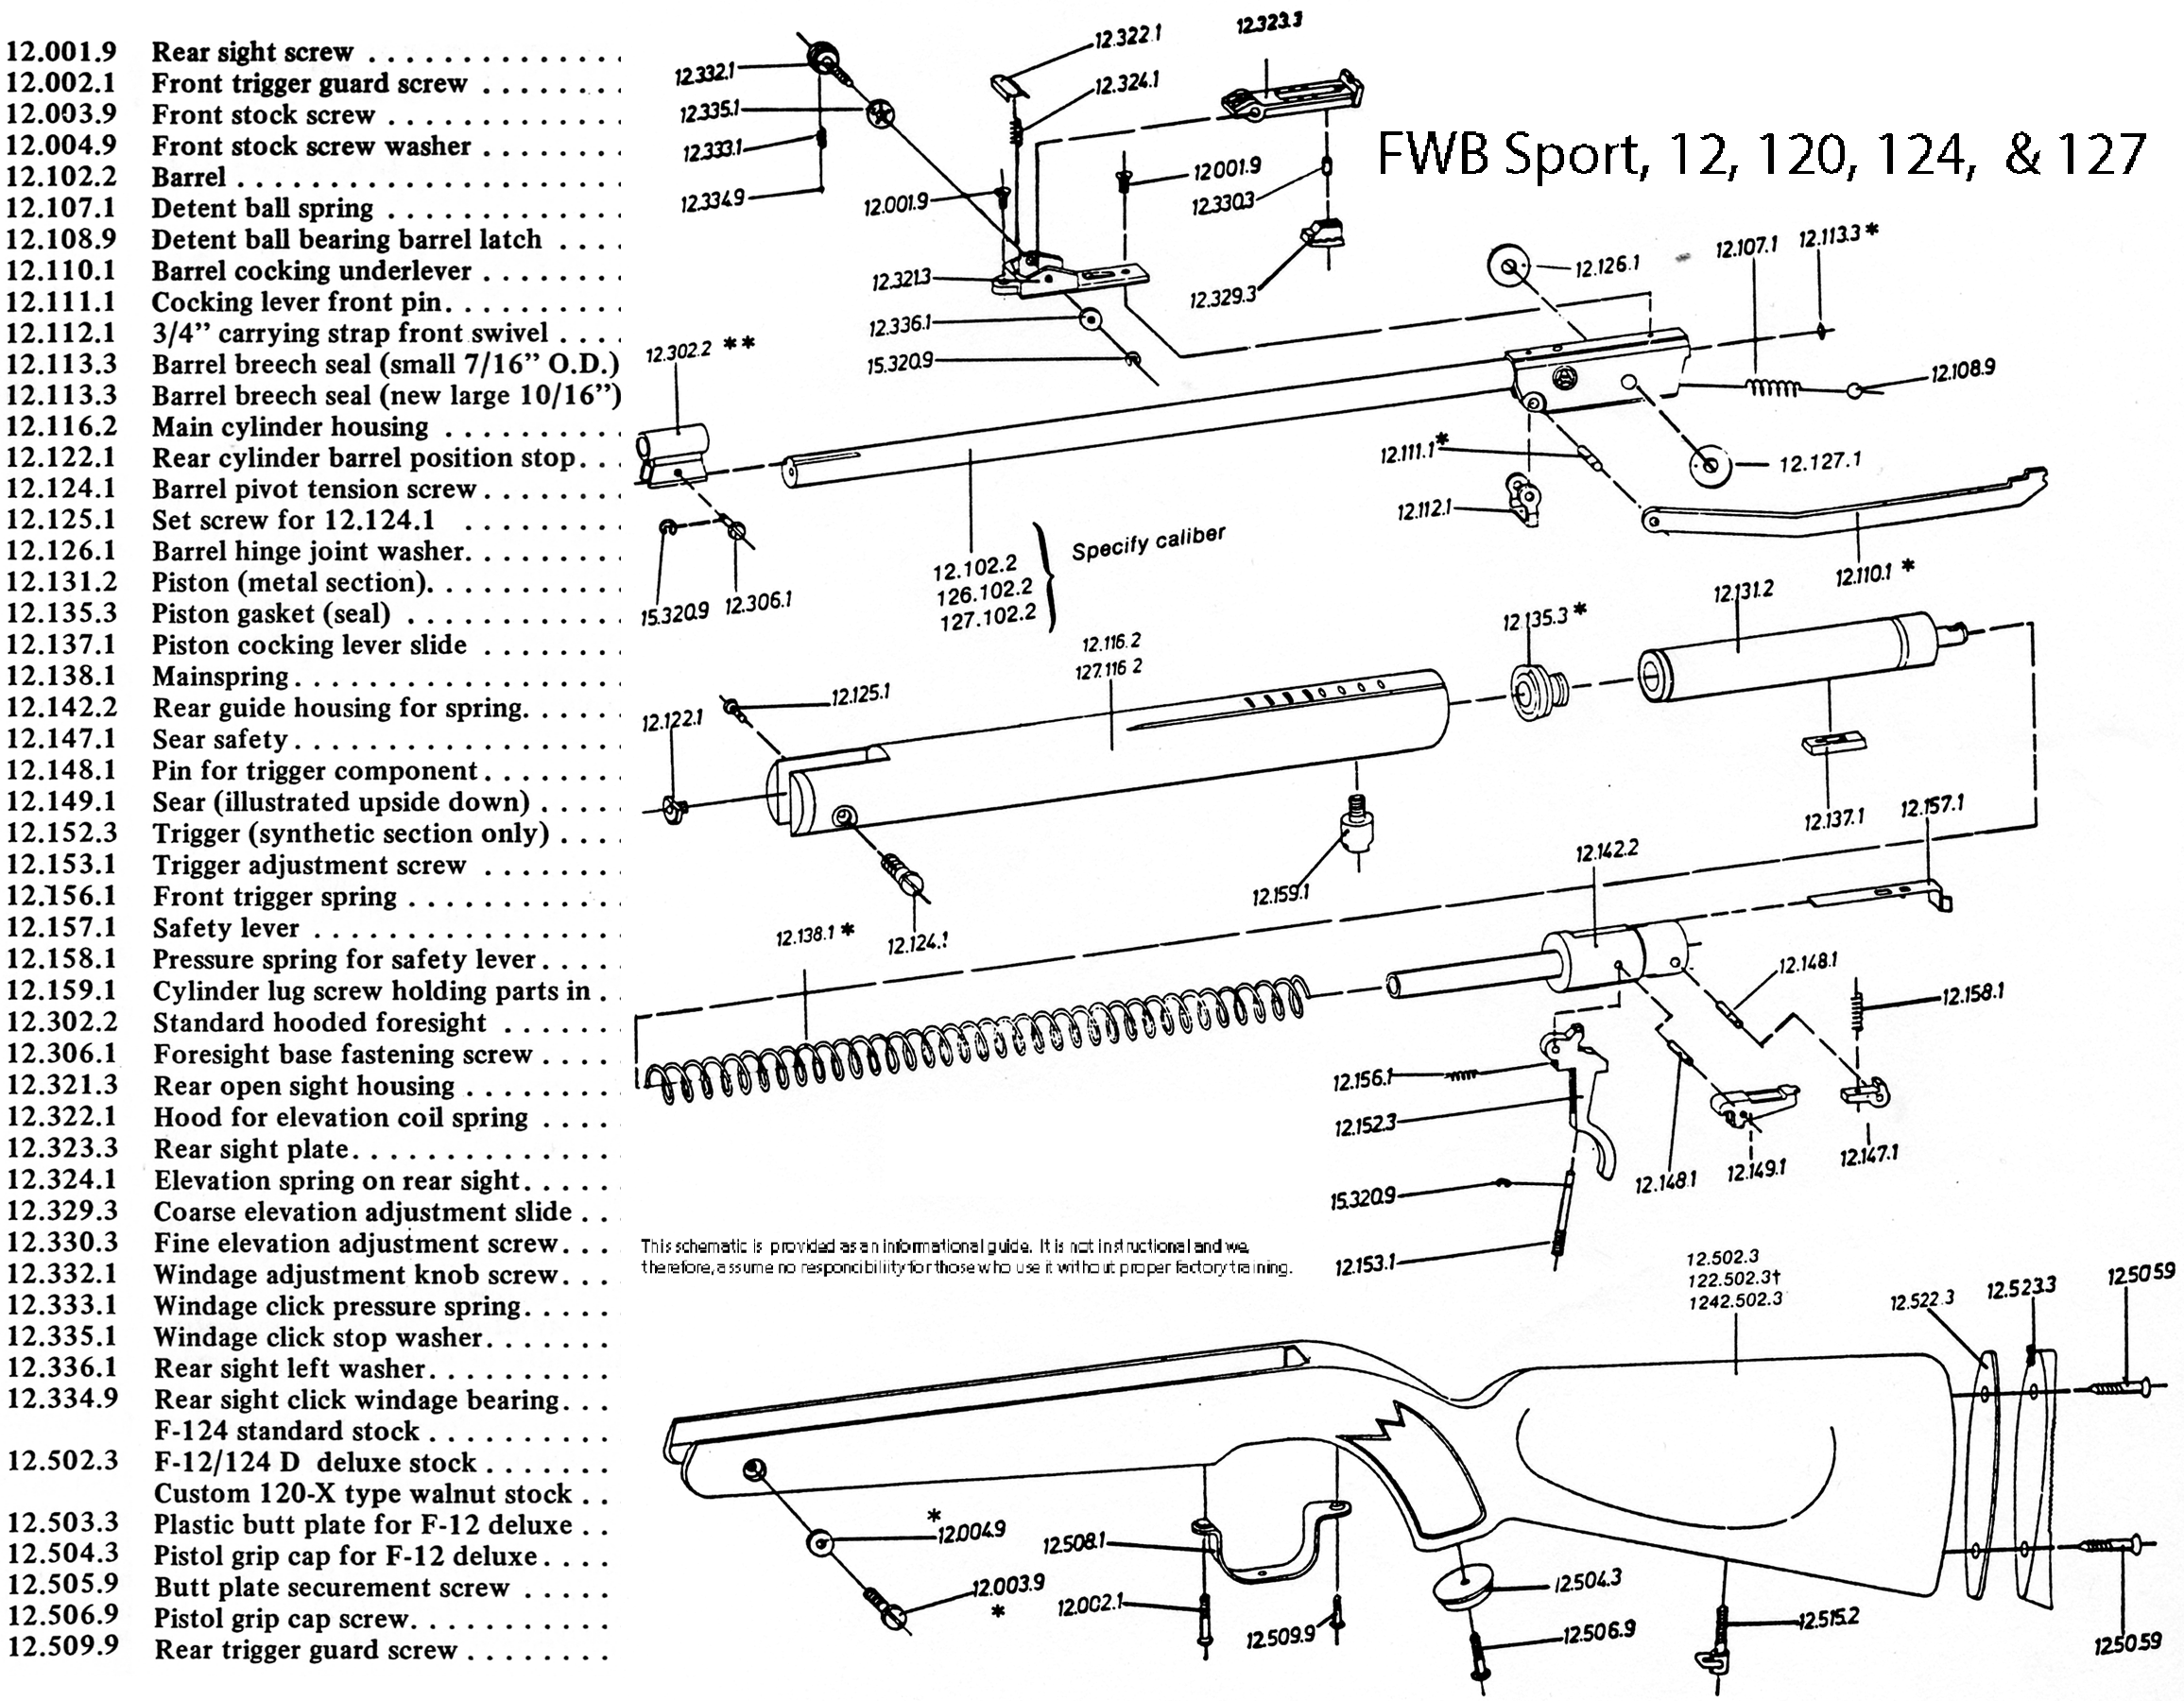 12, 120, 121, 124, and 127 Sport Schematic